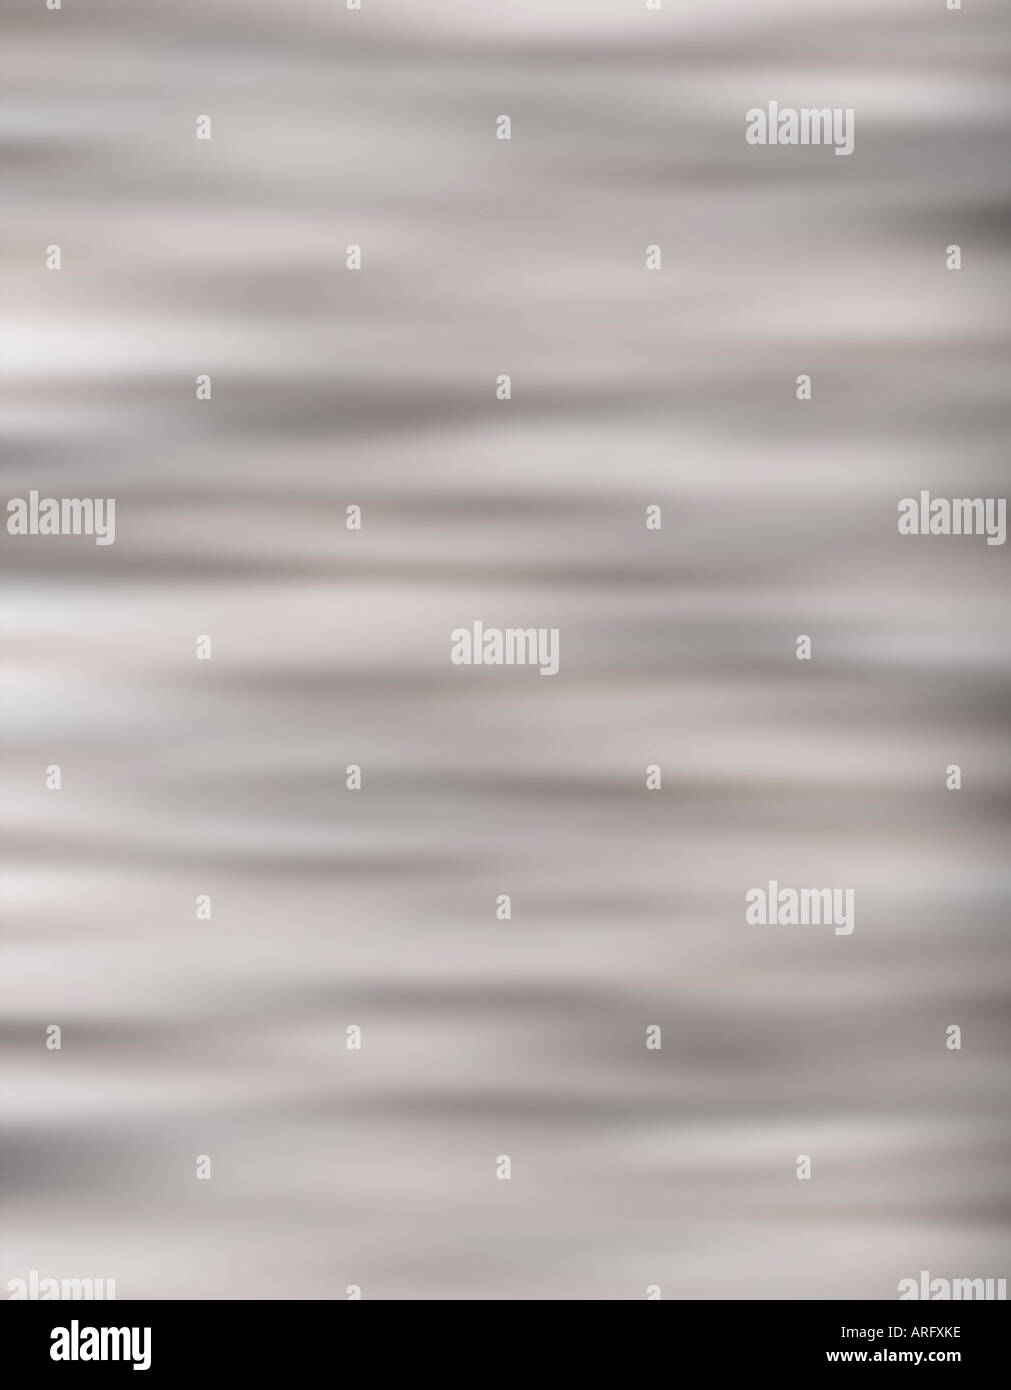 ABSTRACT BACKGROUND WITH GREY RIPPLE PATTERN Stock Photo